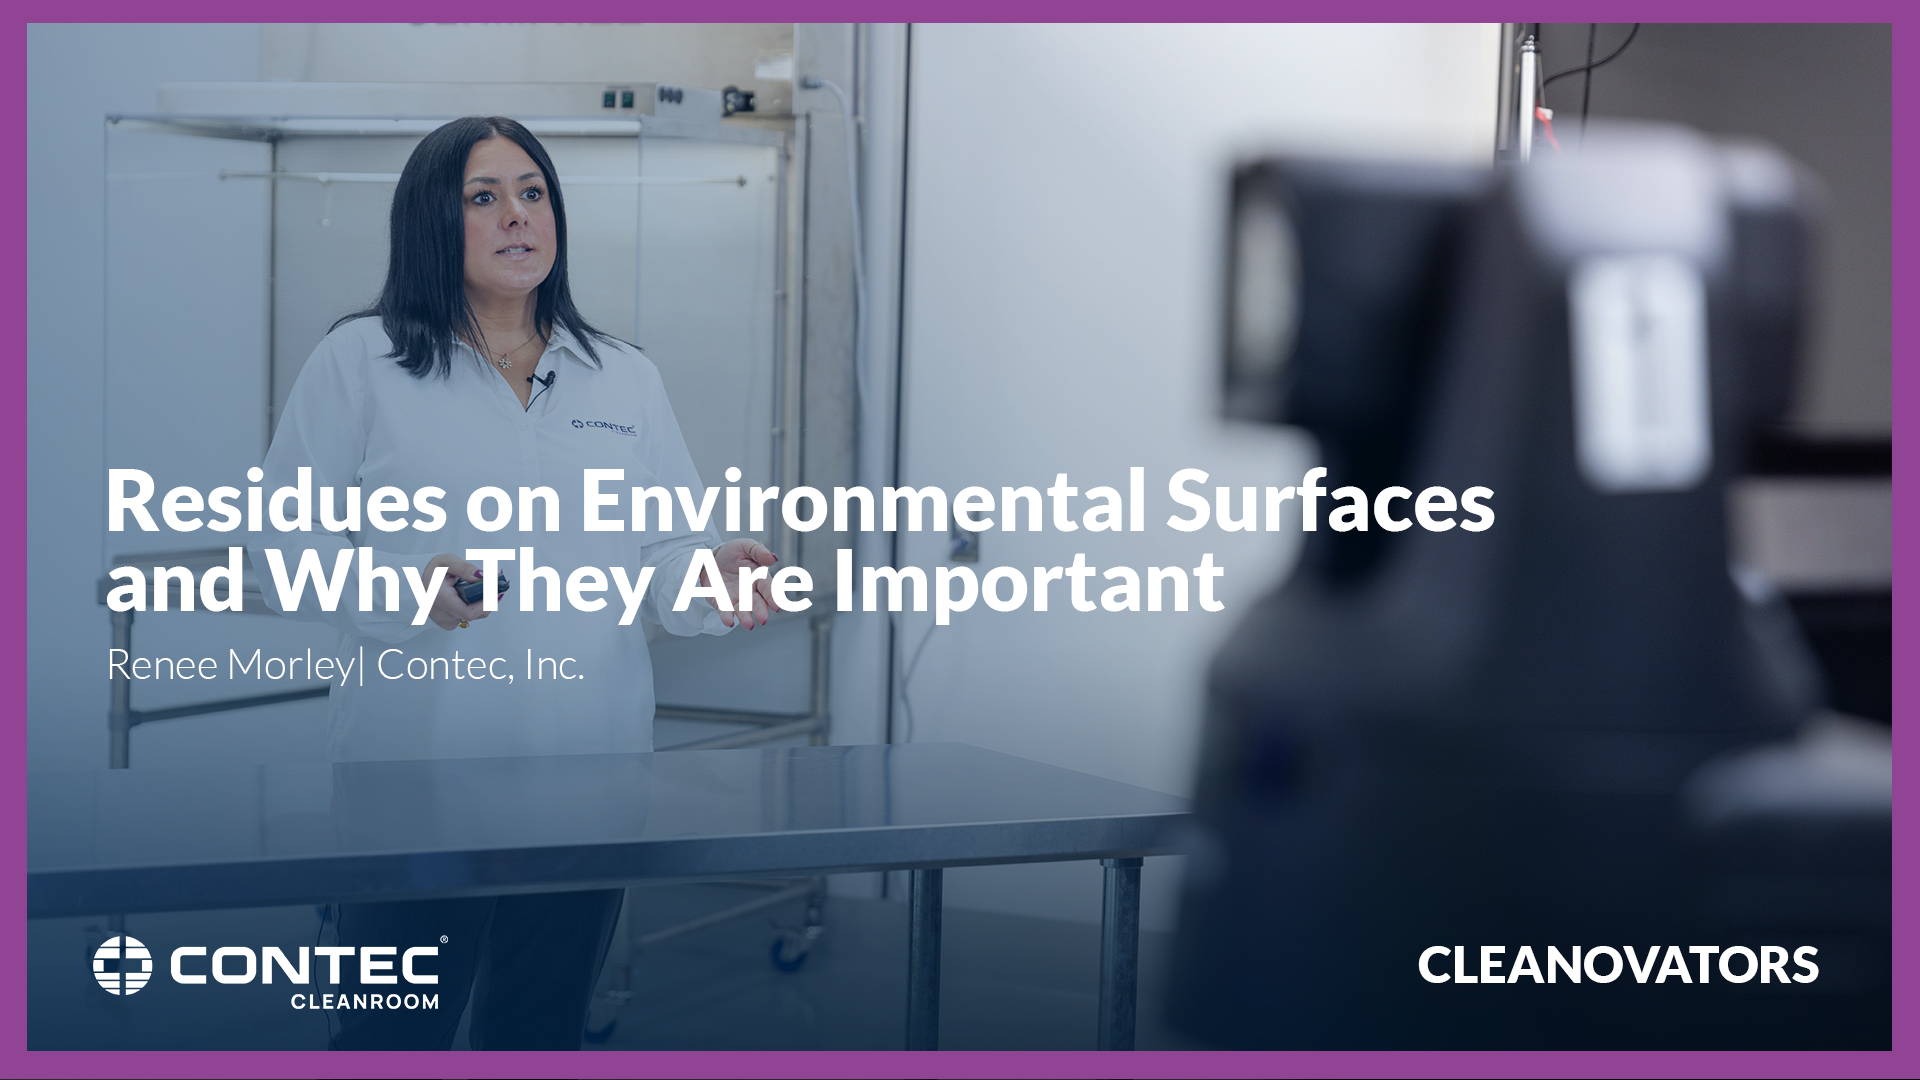 Residues on Environmental Surfaces and Why They Are Important